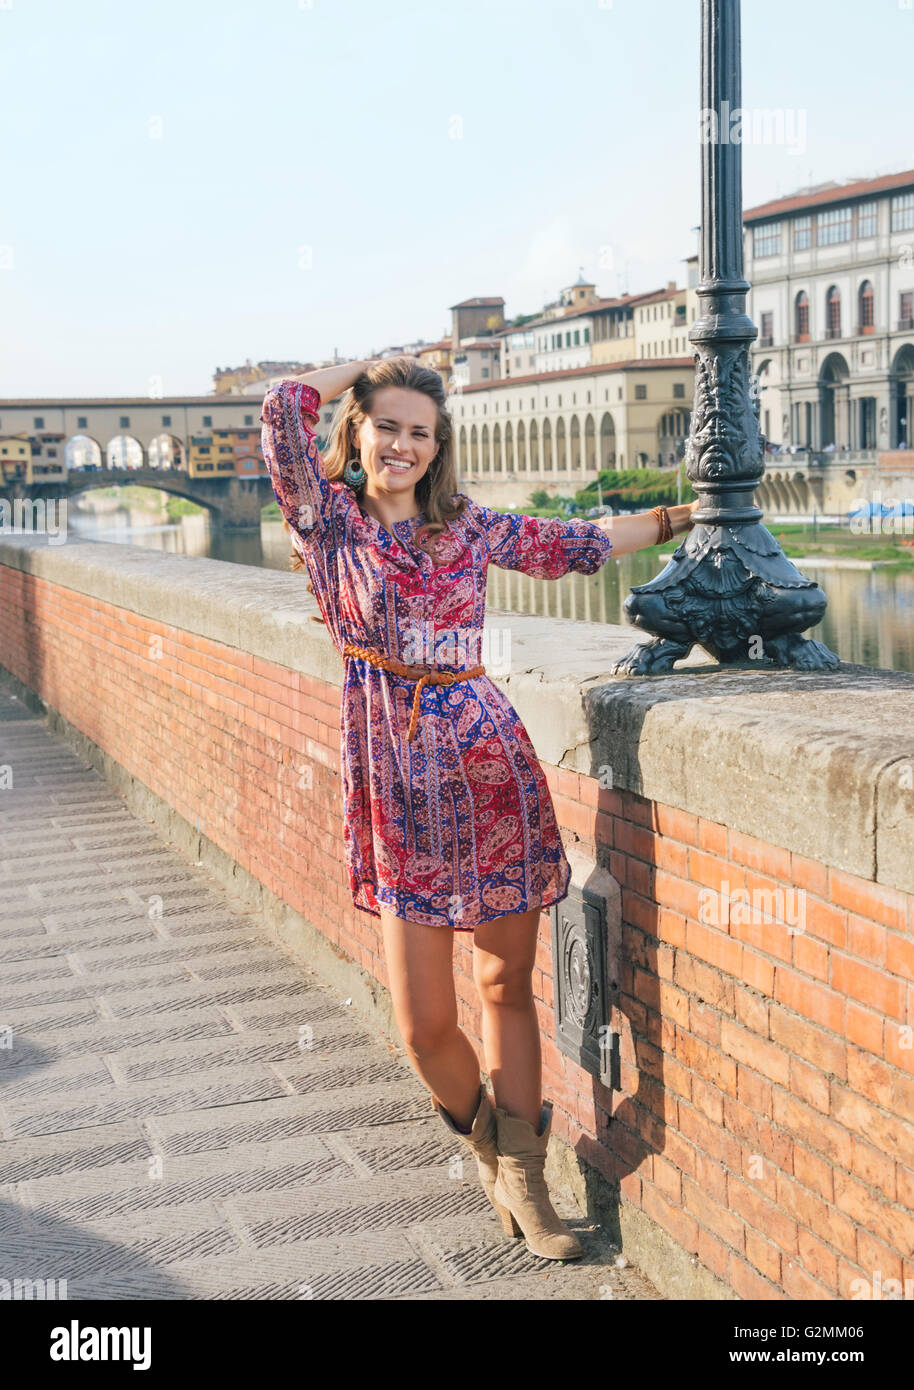 Remarkable holiday in Florence. Full length portrait of happy woman in a dress walking along the embankment near Ponte Vecchio Stock Photo